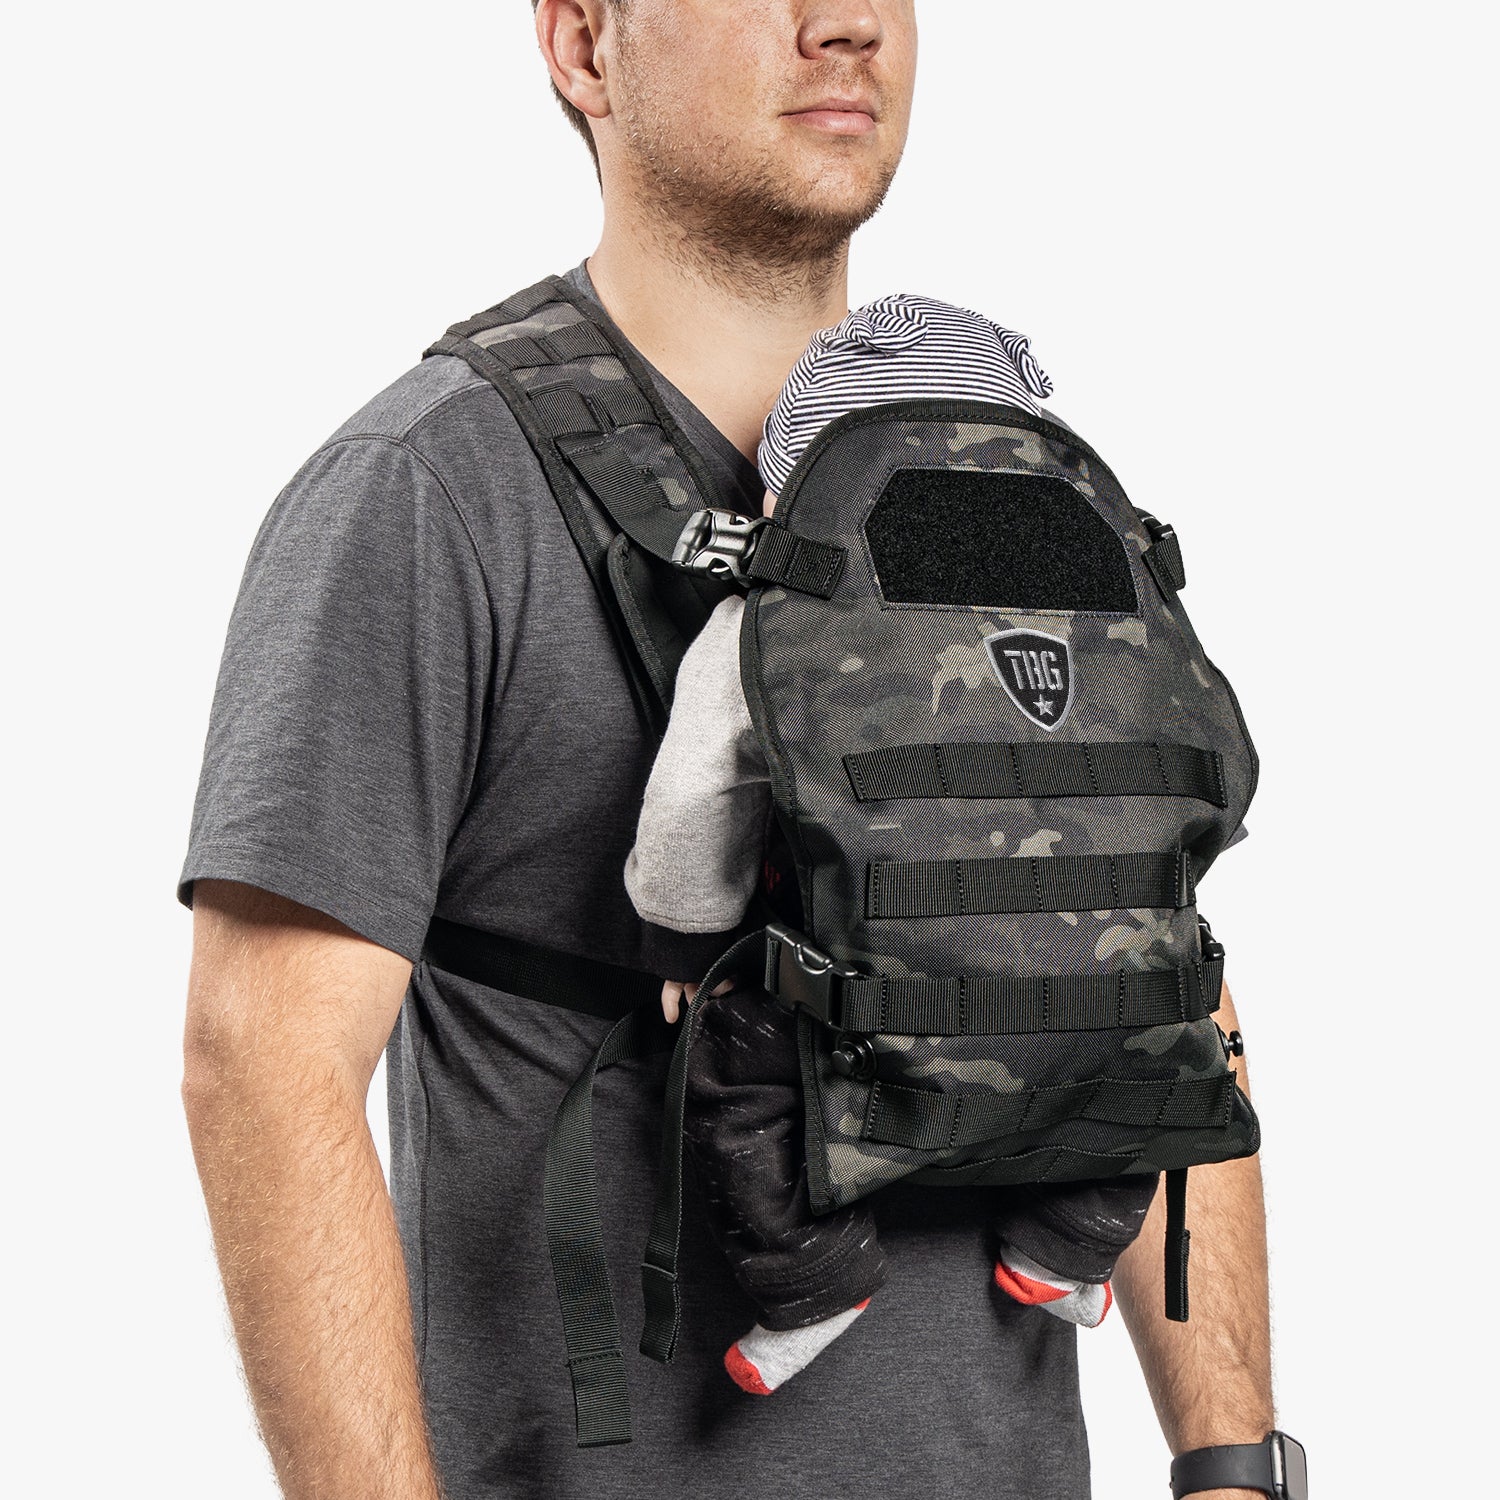 This Tactical Baby Carrier is lightweight, thus comfortable for the first-time dad. It's durable and can be used for other kids then.